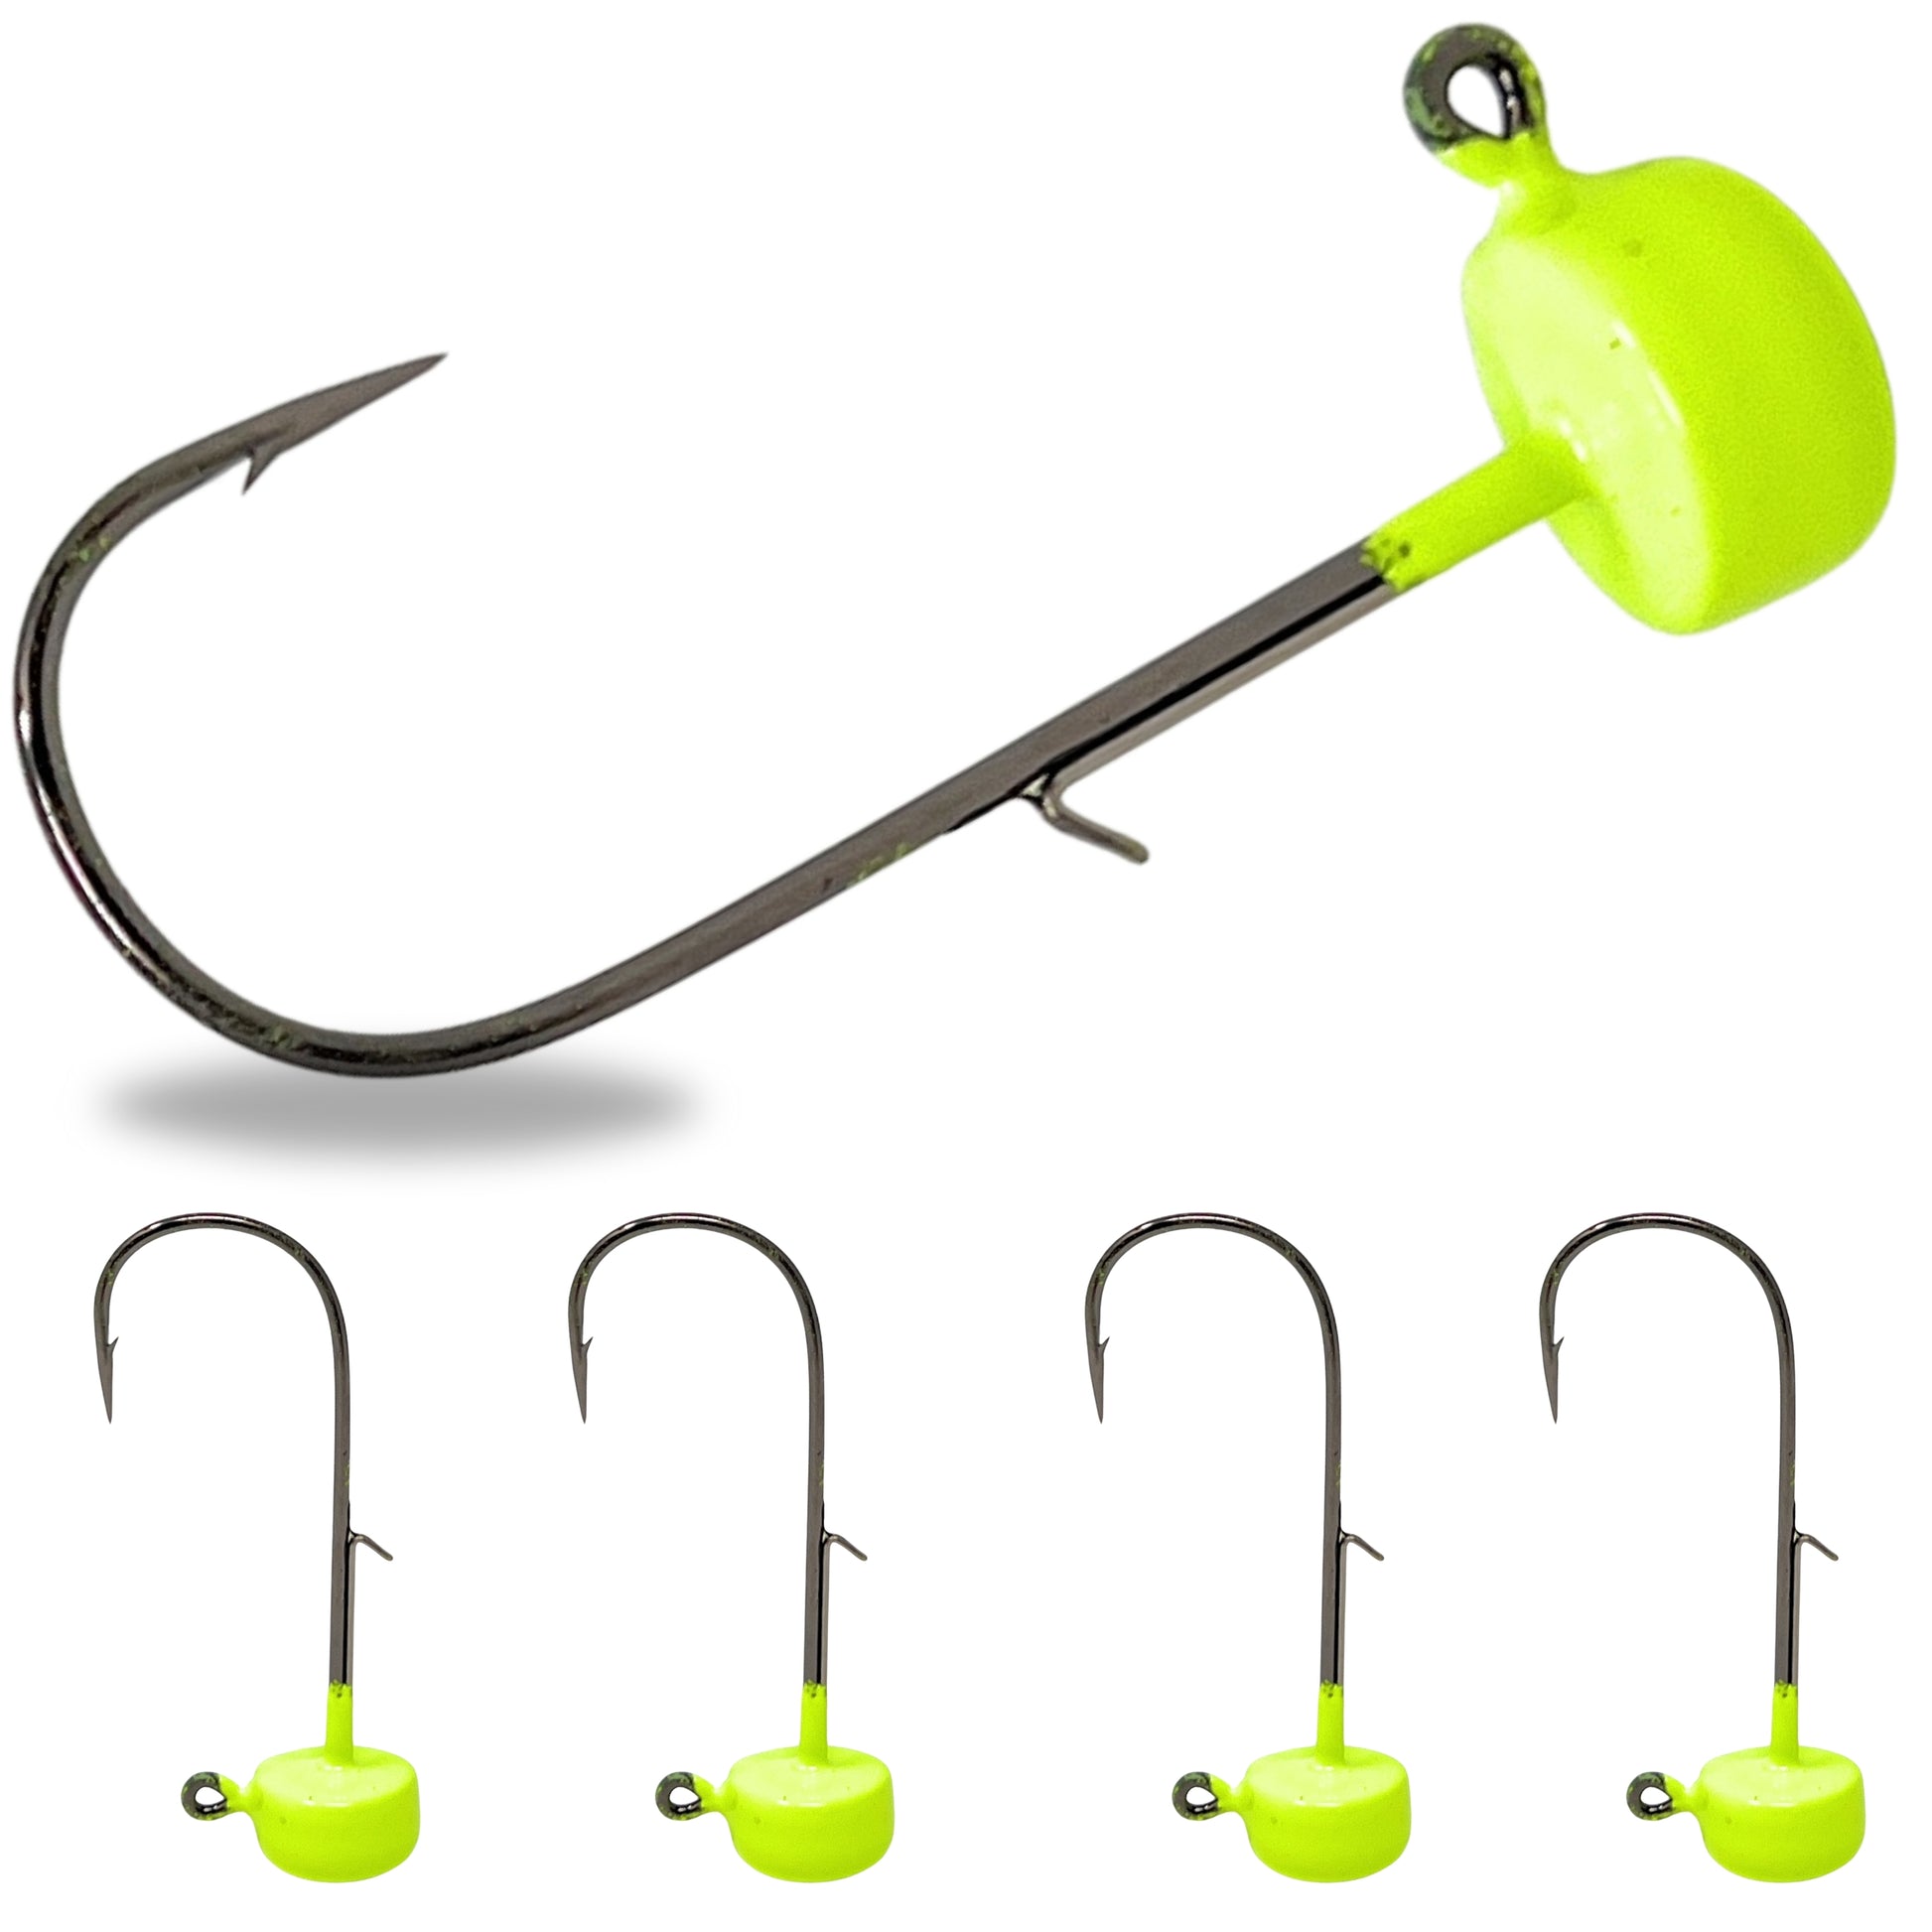 Reaction Tackle Tungsten Mushroom Head Ned Rig Shroom Jig Heads for Finesse  Fishing, Weedless Jig Head for Bass Fishing with Soft Lures (5-Pack) 1/8oz